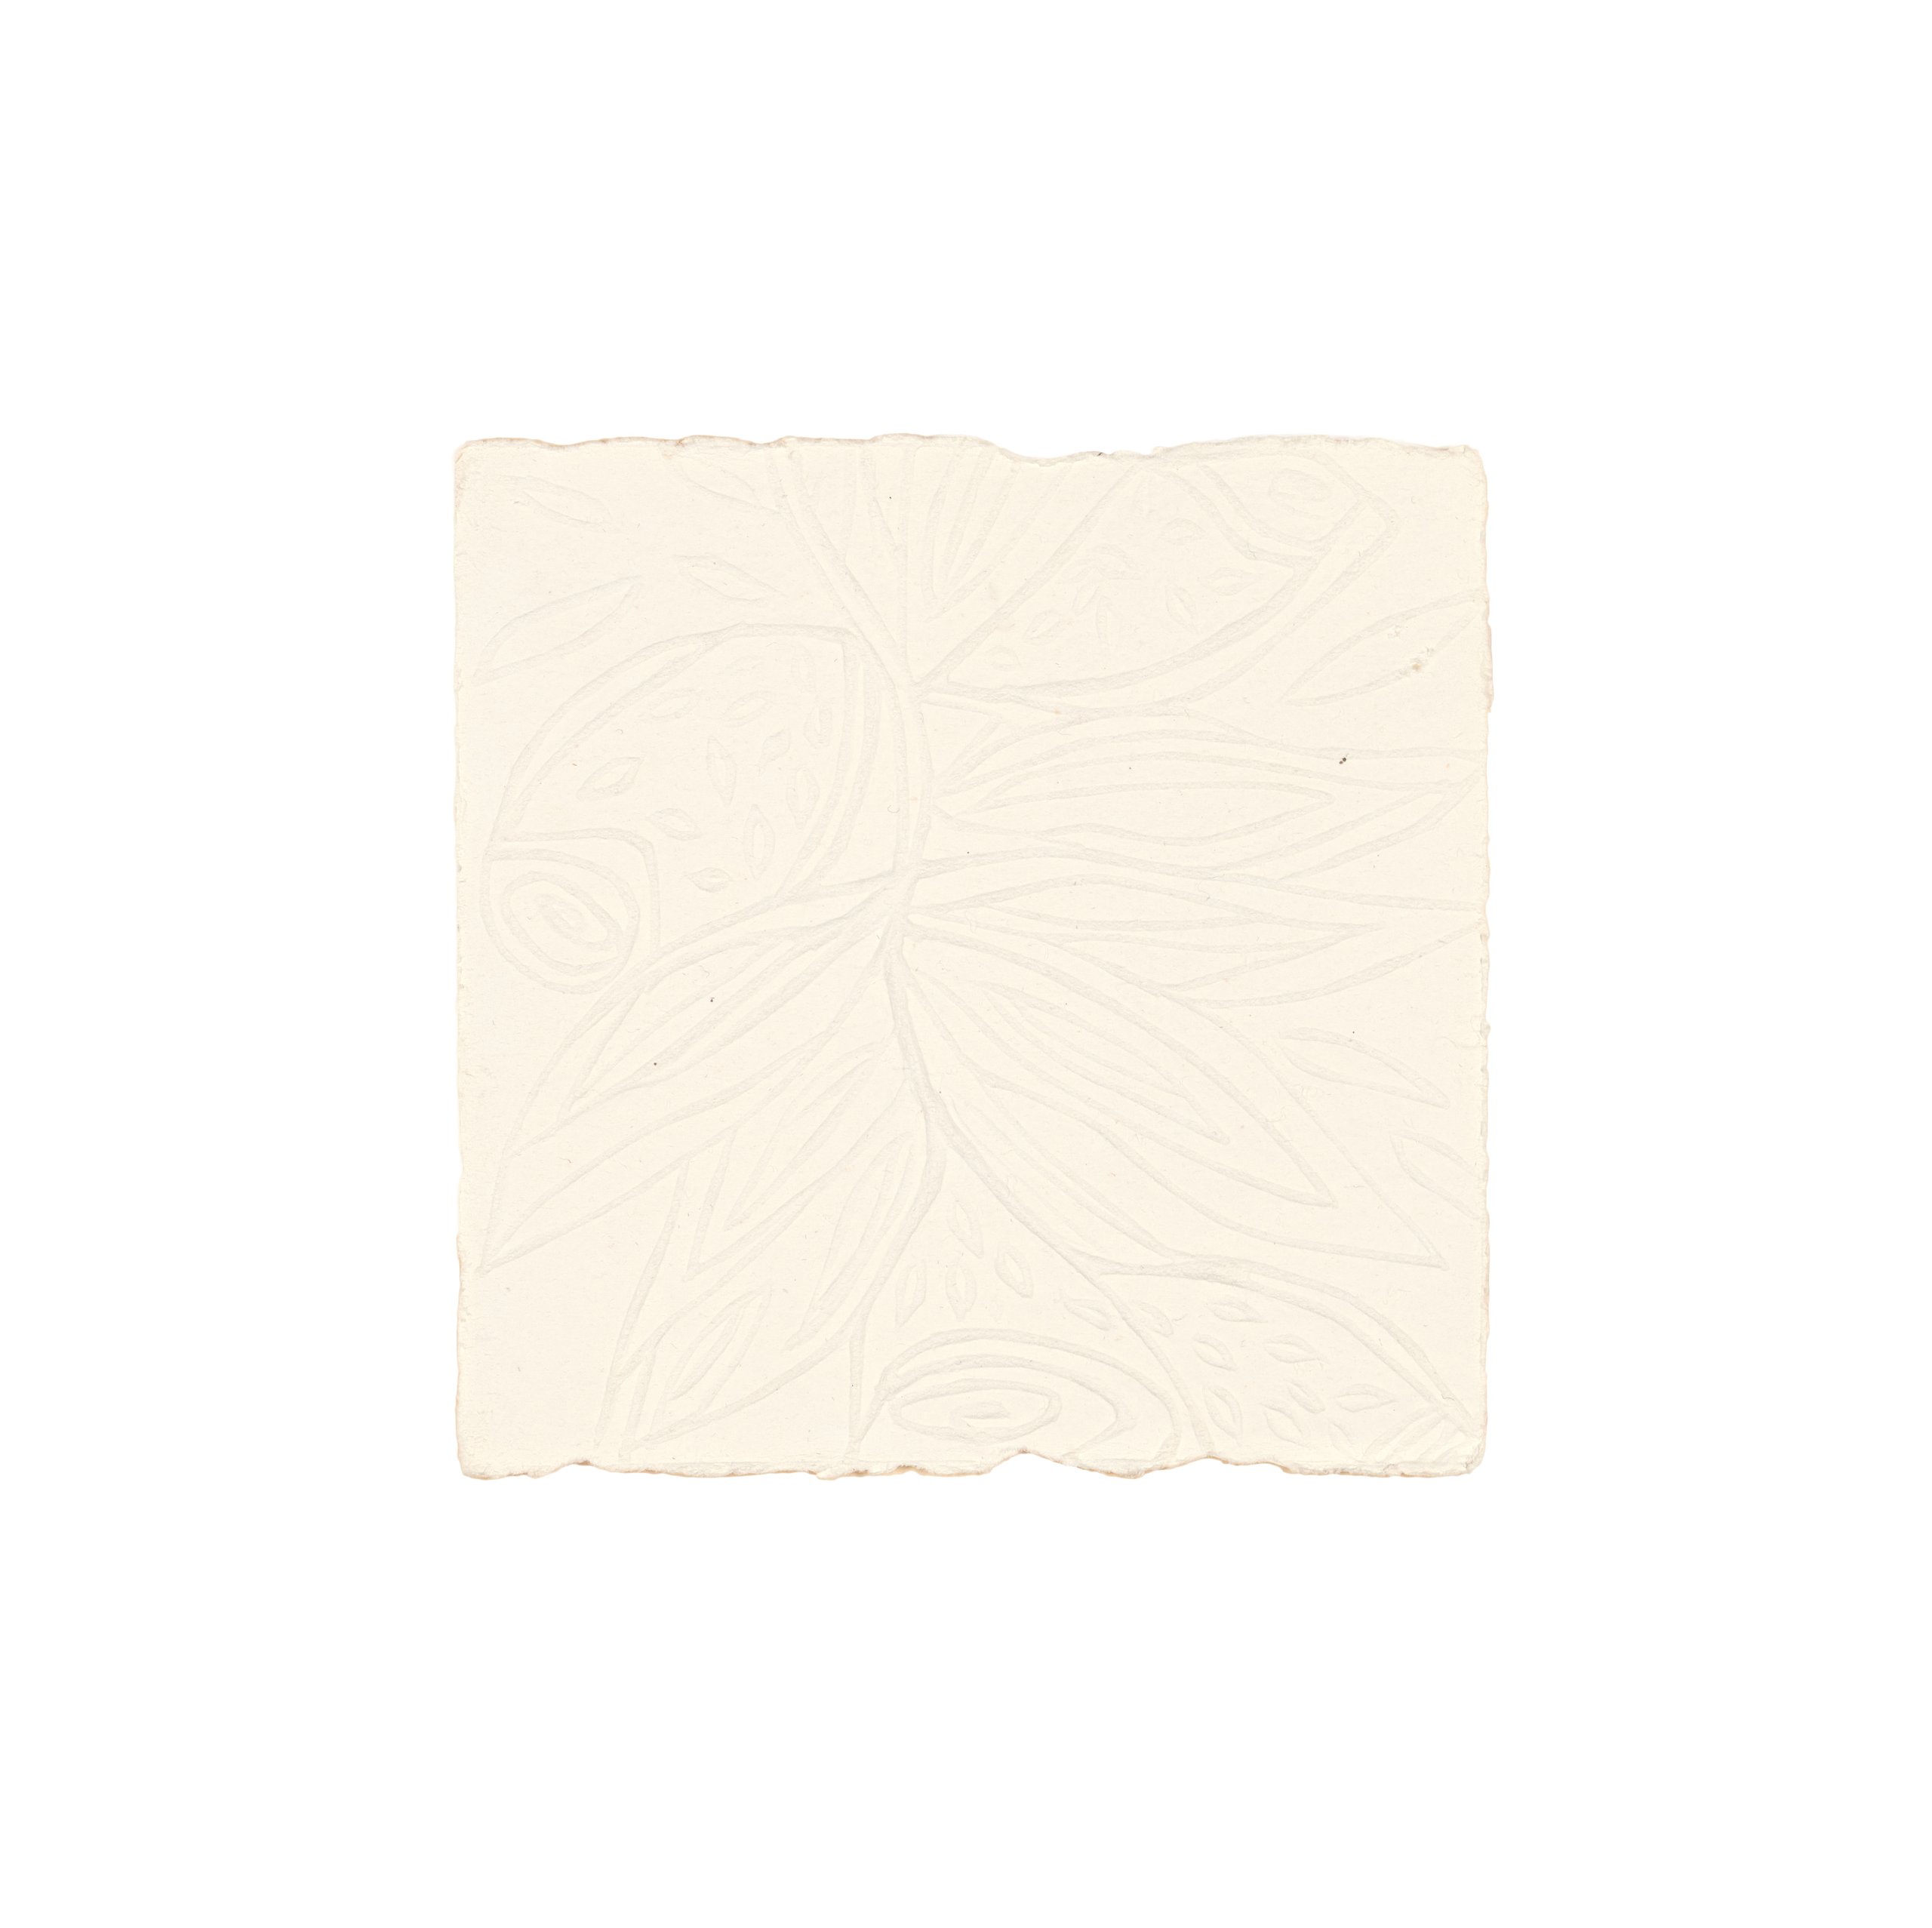 Embossed paper by Euraba Paper Company